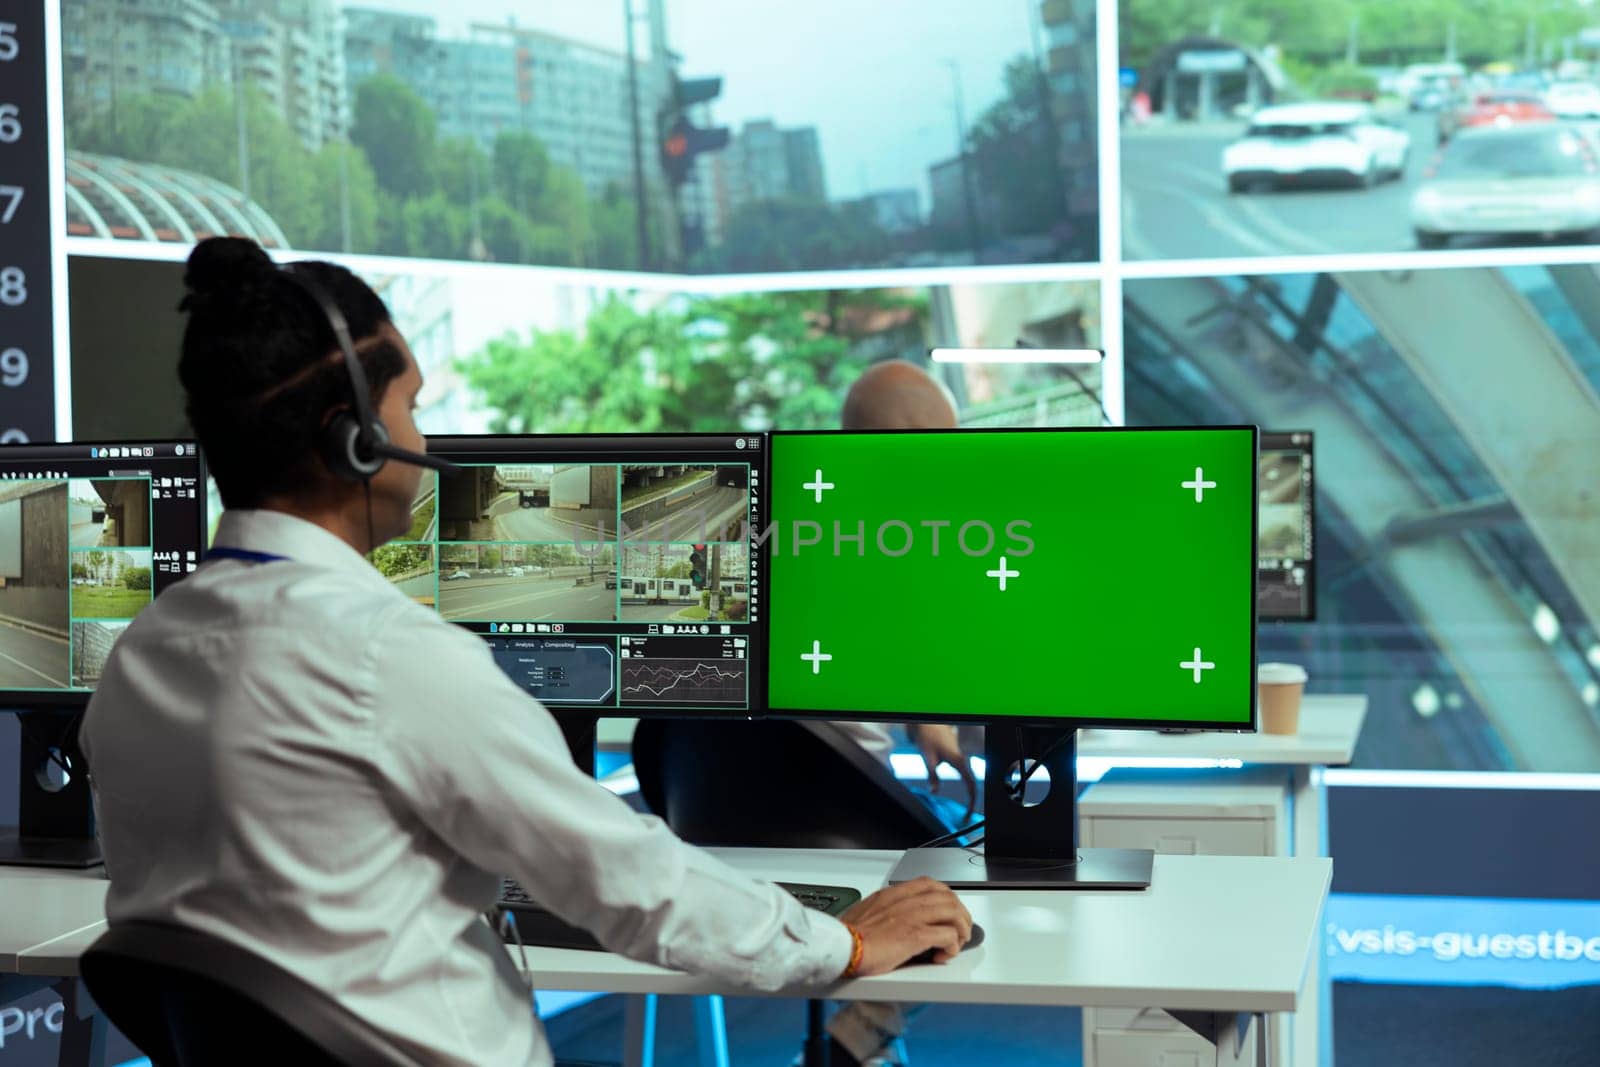 Indian specialist monitoring traffic surveillance next to a greenscreen display, gather intelligence on traffic activity in the city. Government employee collecting data on cars, plate recognition.